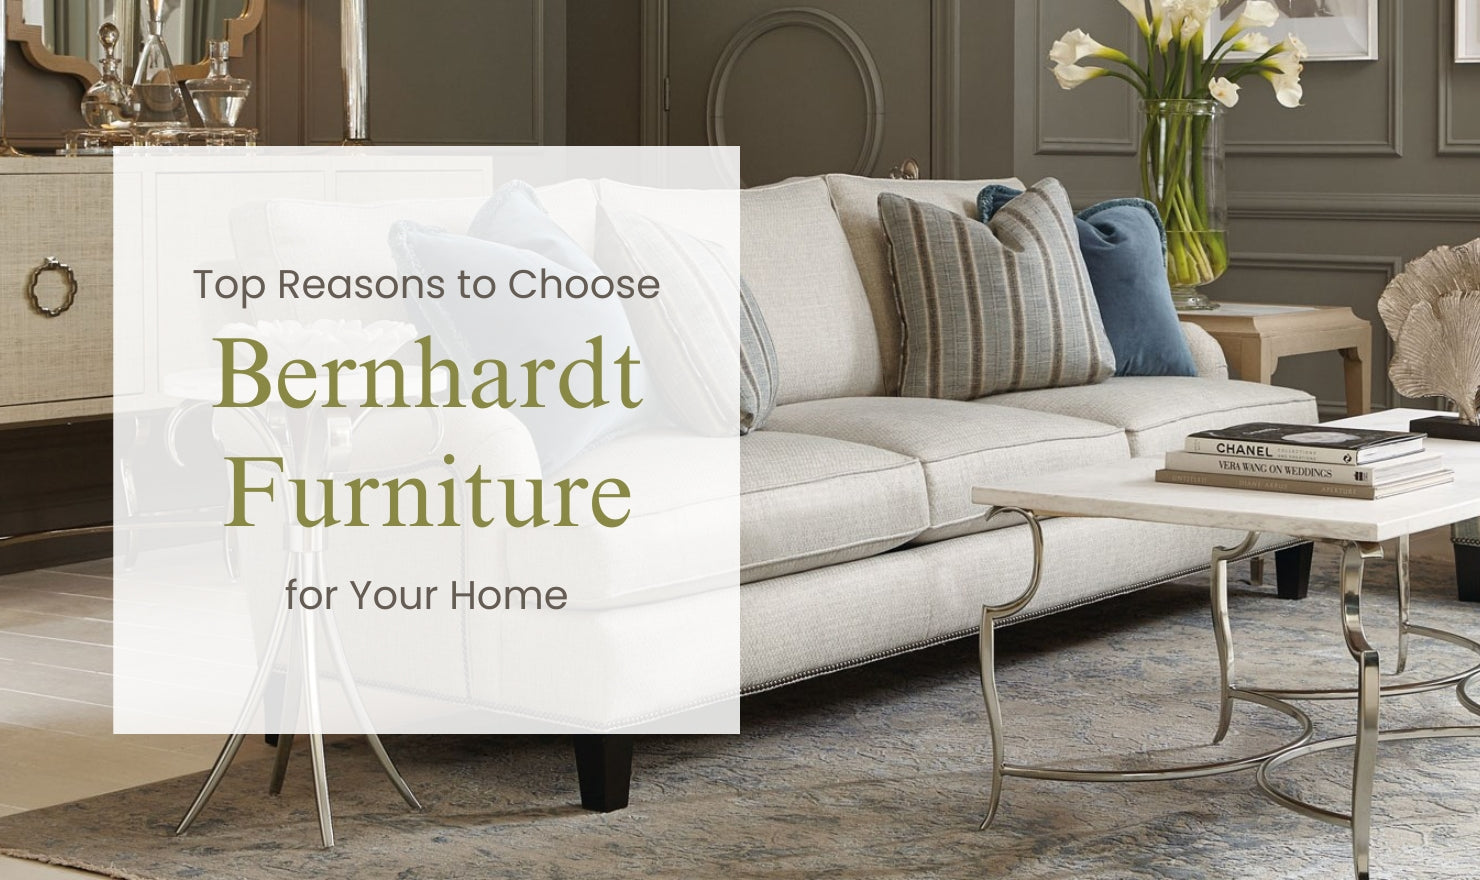 Top Reasons To Choose Bernhardt Furniture For Your Home